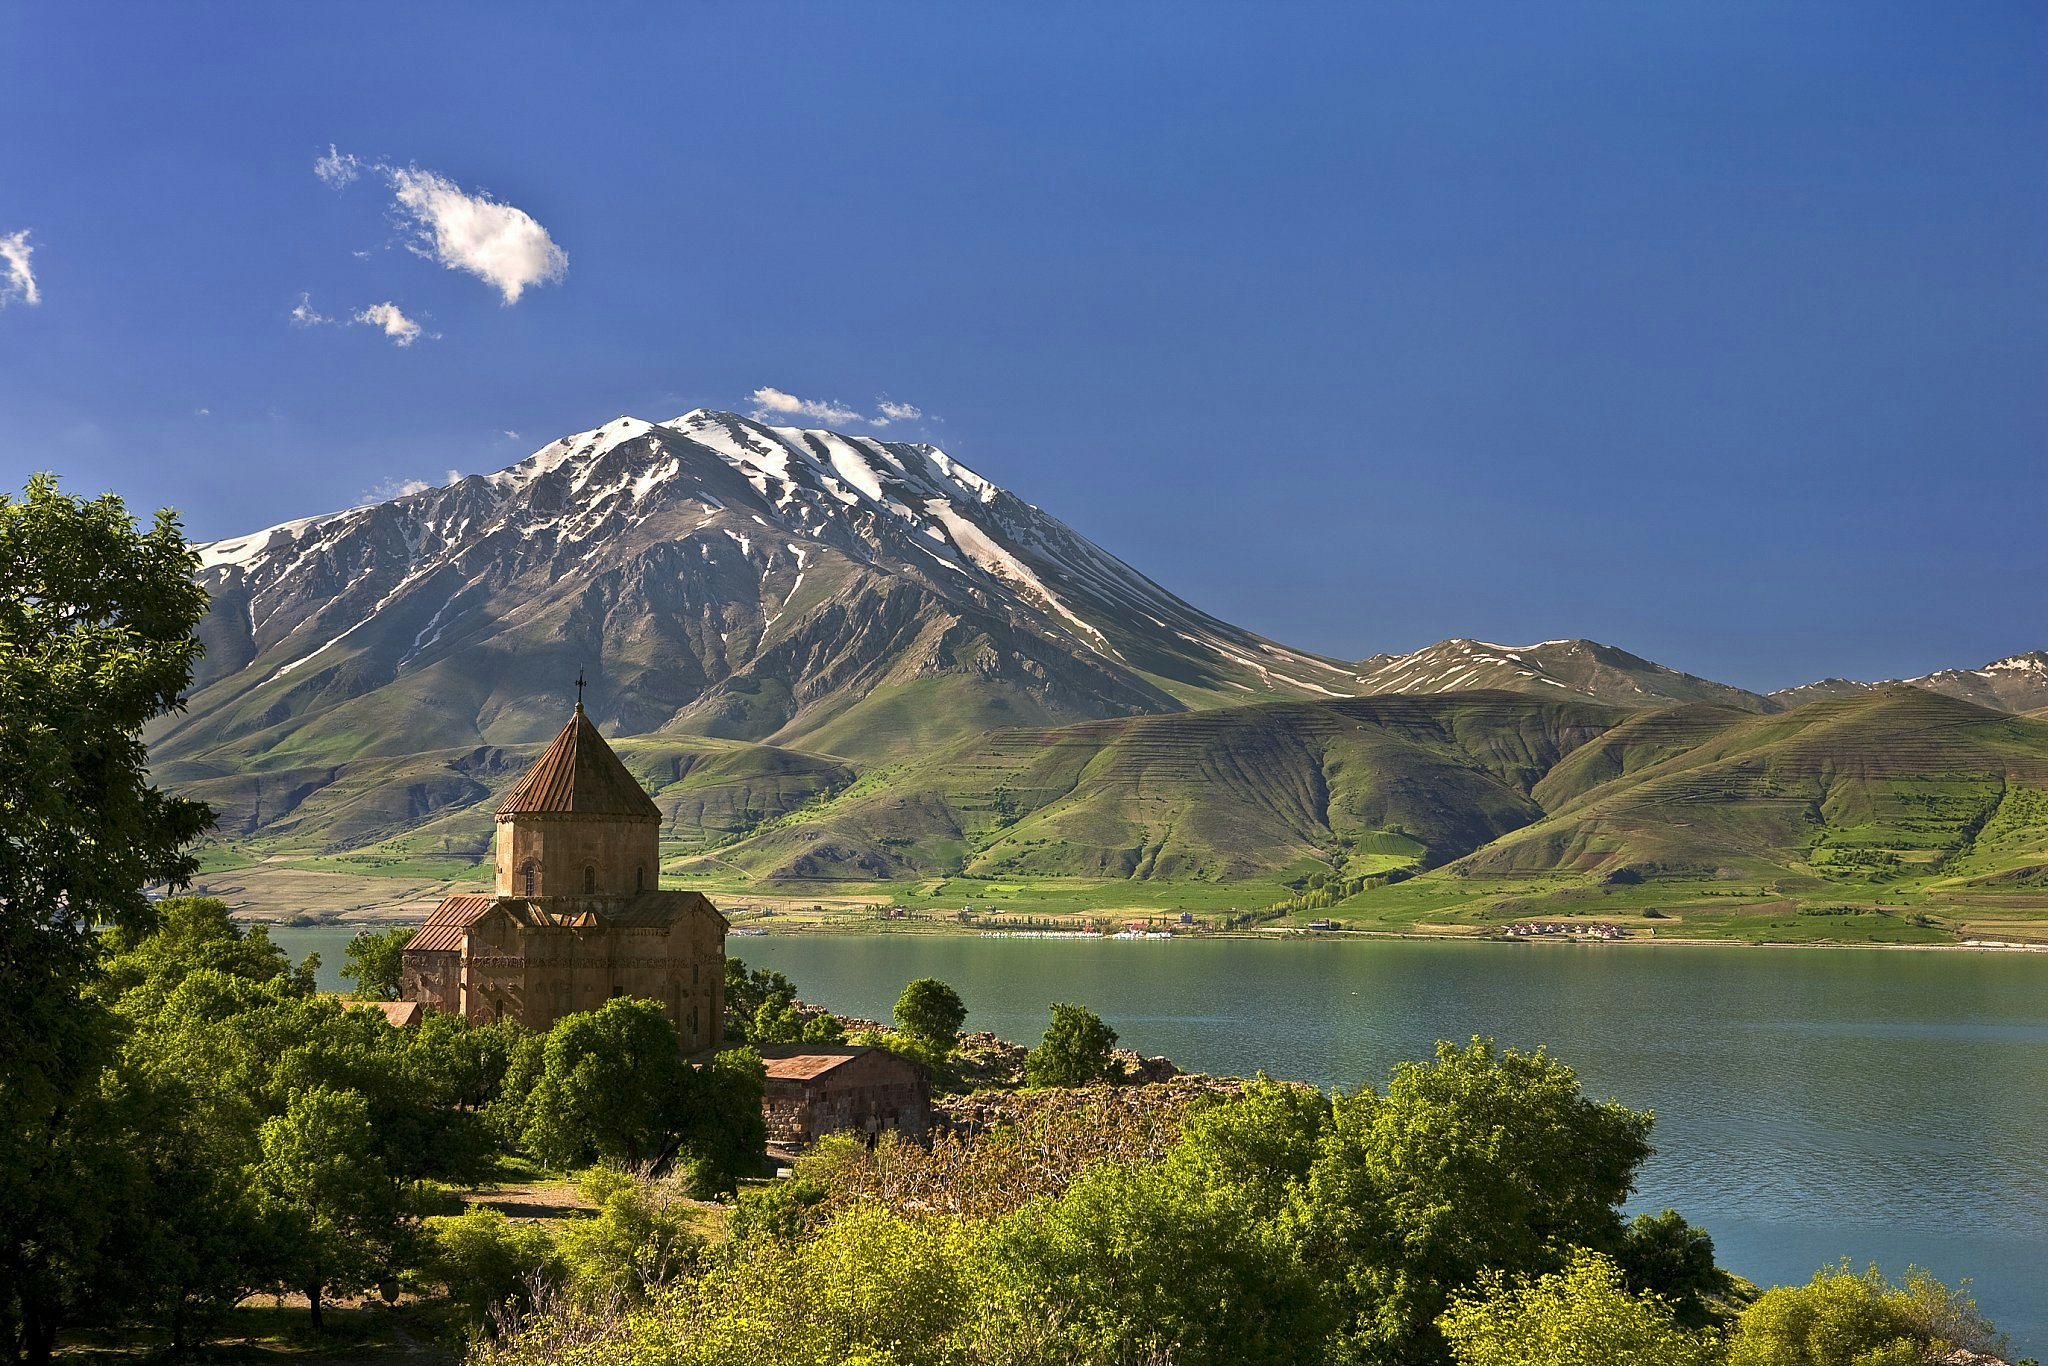 A conical domed church on an island in a lake, with a huge snow-capped mountain rising up from the shore beyond.